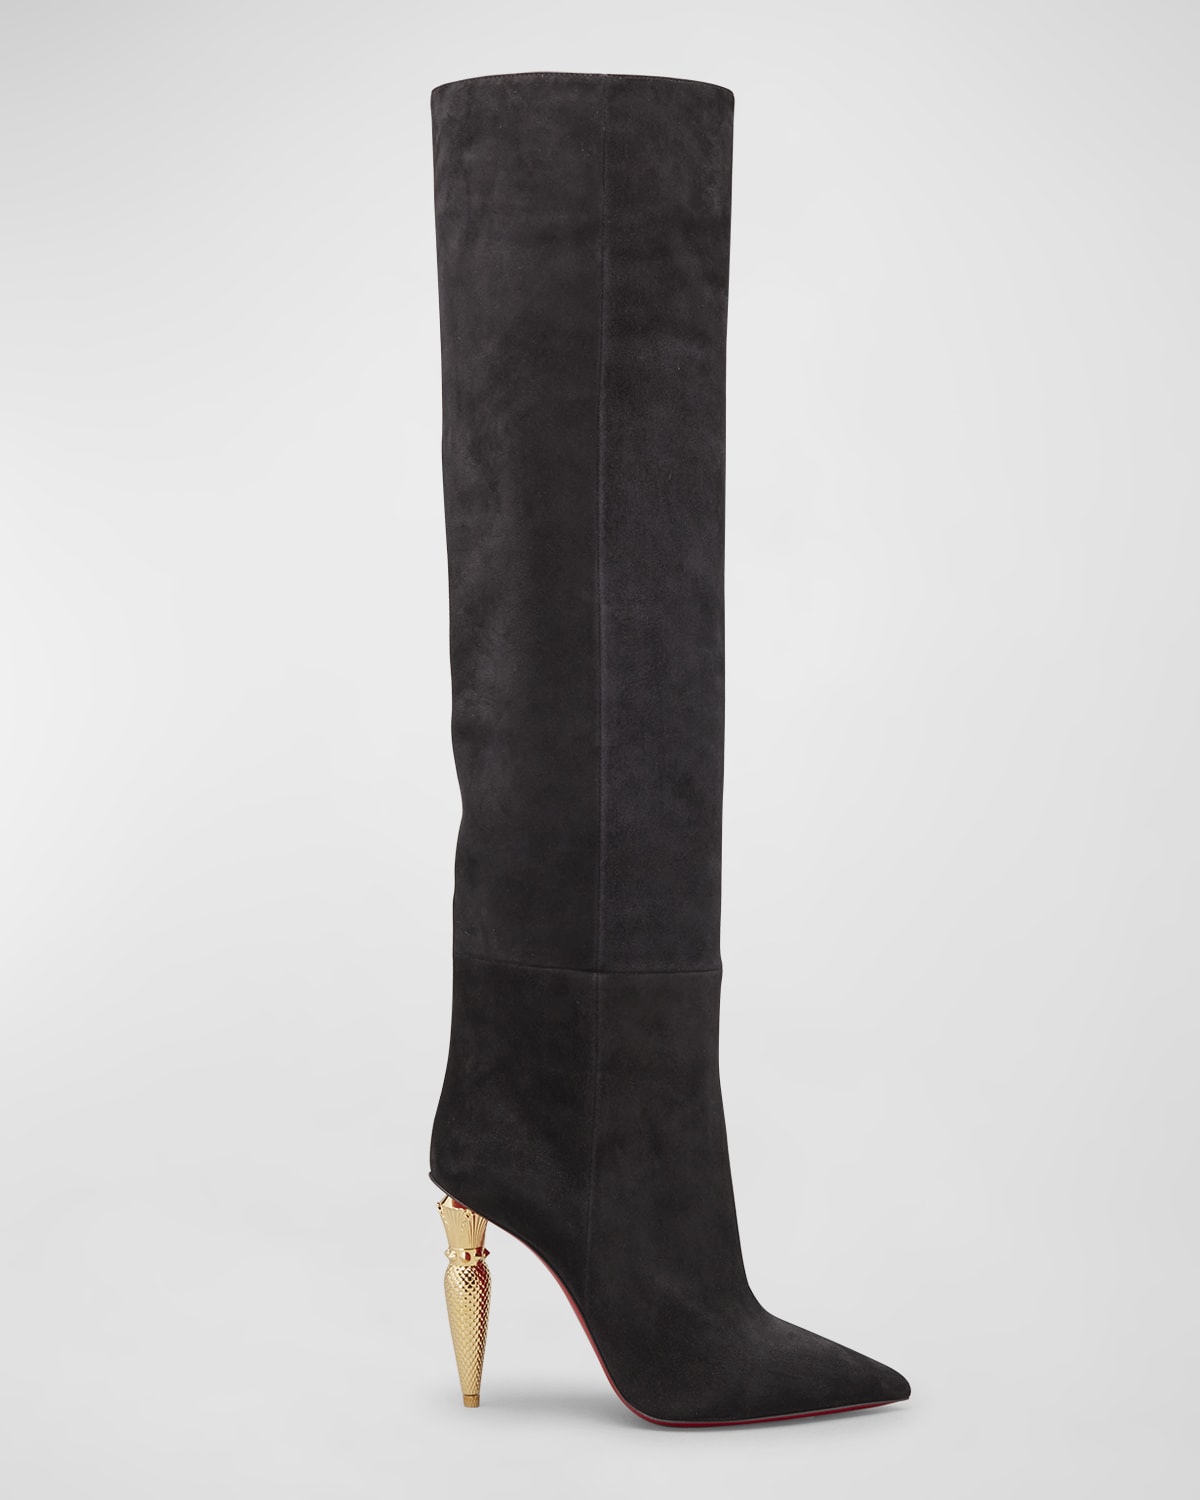 Christian Louboutin Suede Red Sole Over-The-Knee Boots | Neiman Marcus